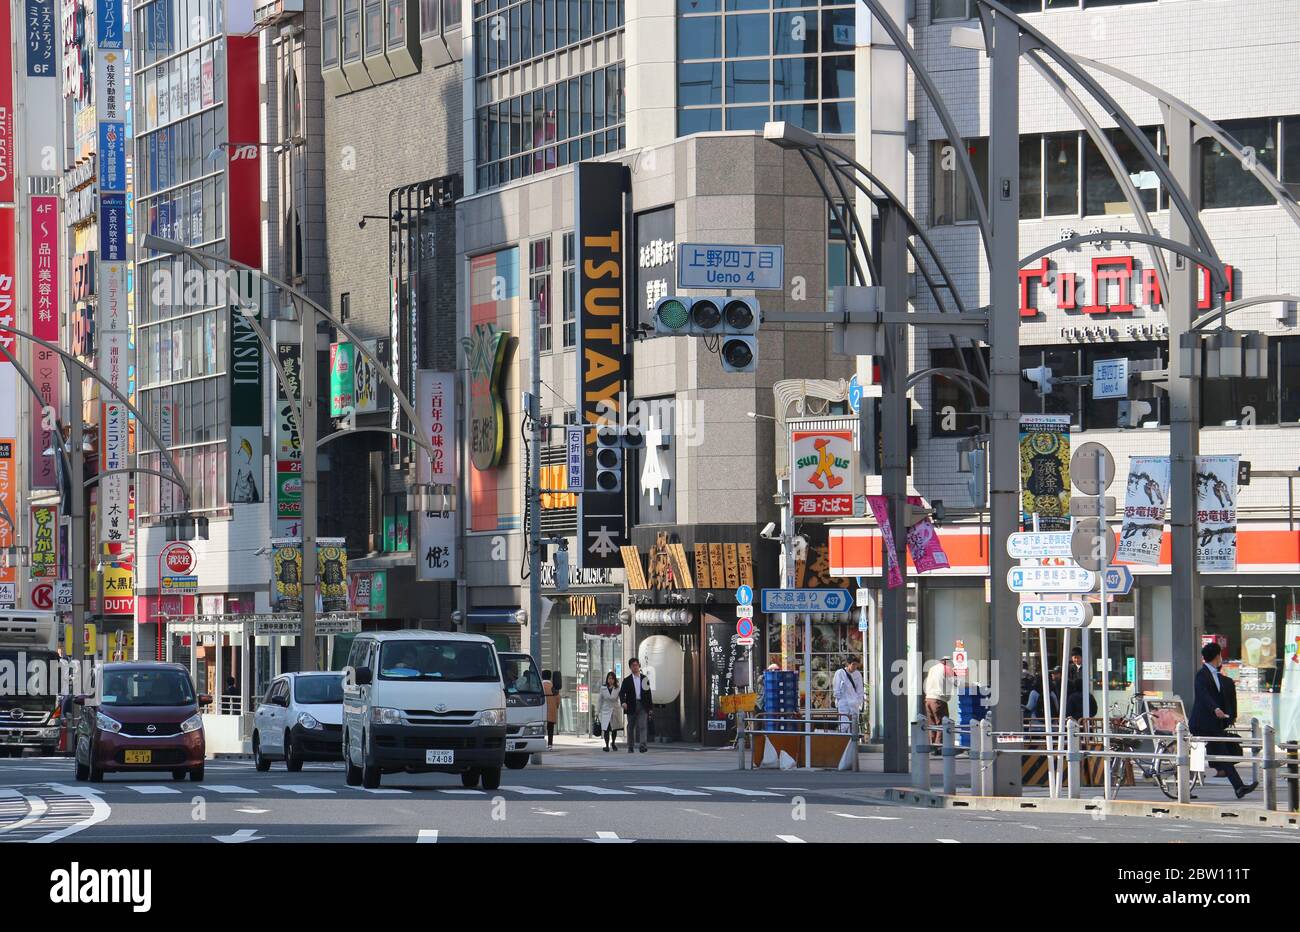 One of the main streets with traffic and shops. Tokyo, Japan Stock Photo